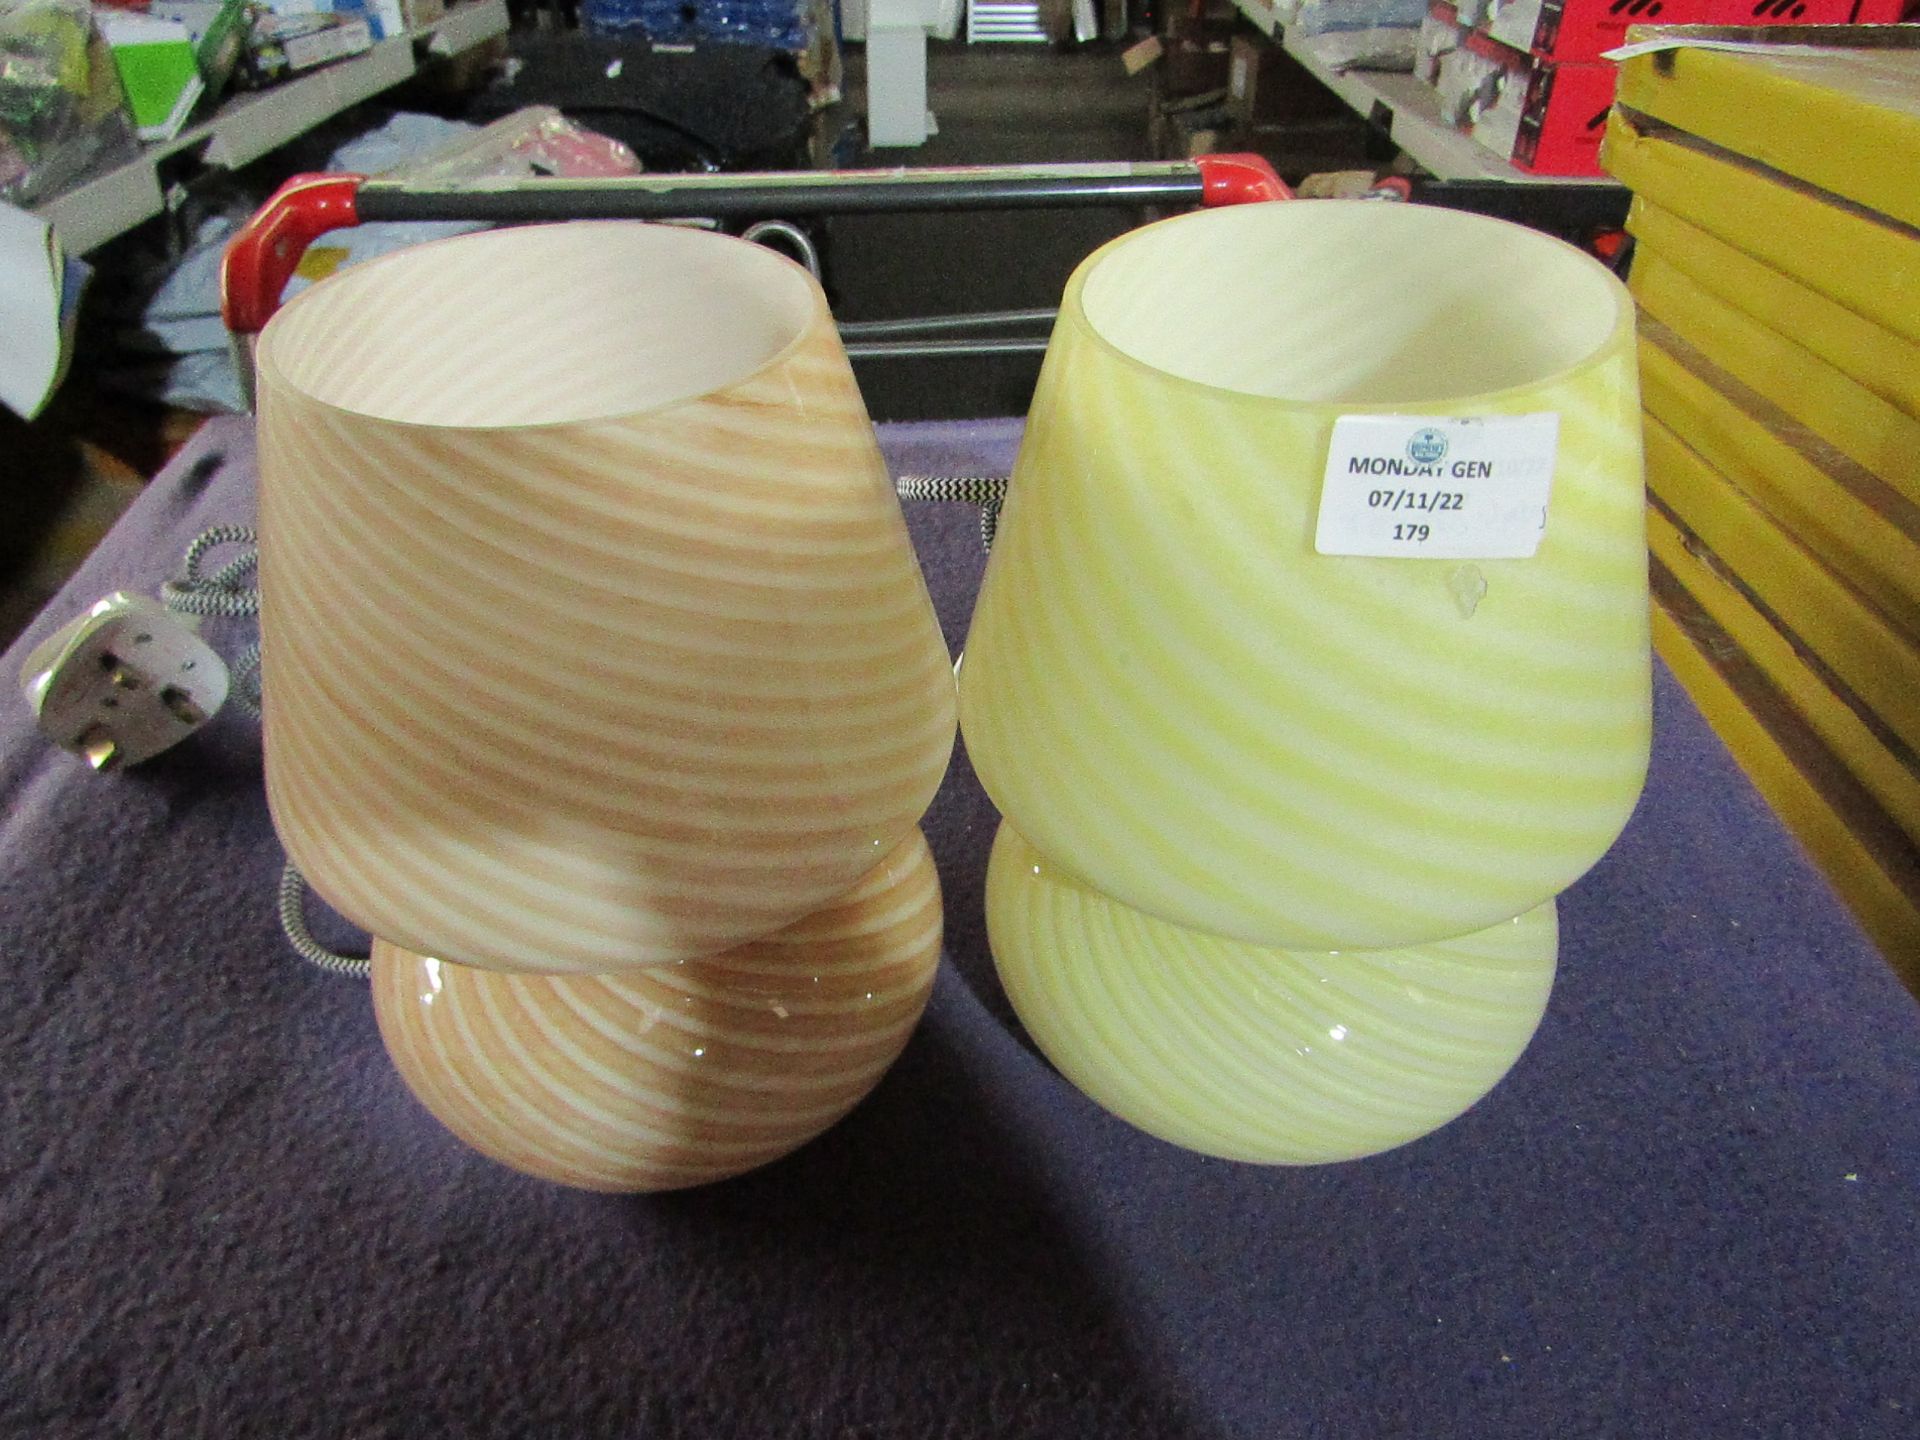 1x Small Orange Glass Bedside Lamp - Please See Image For Design - No Box. 1x Small Yellow Glass